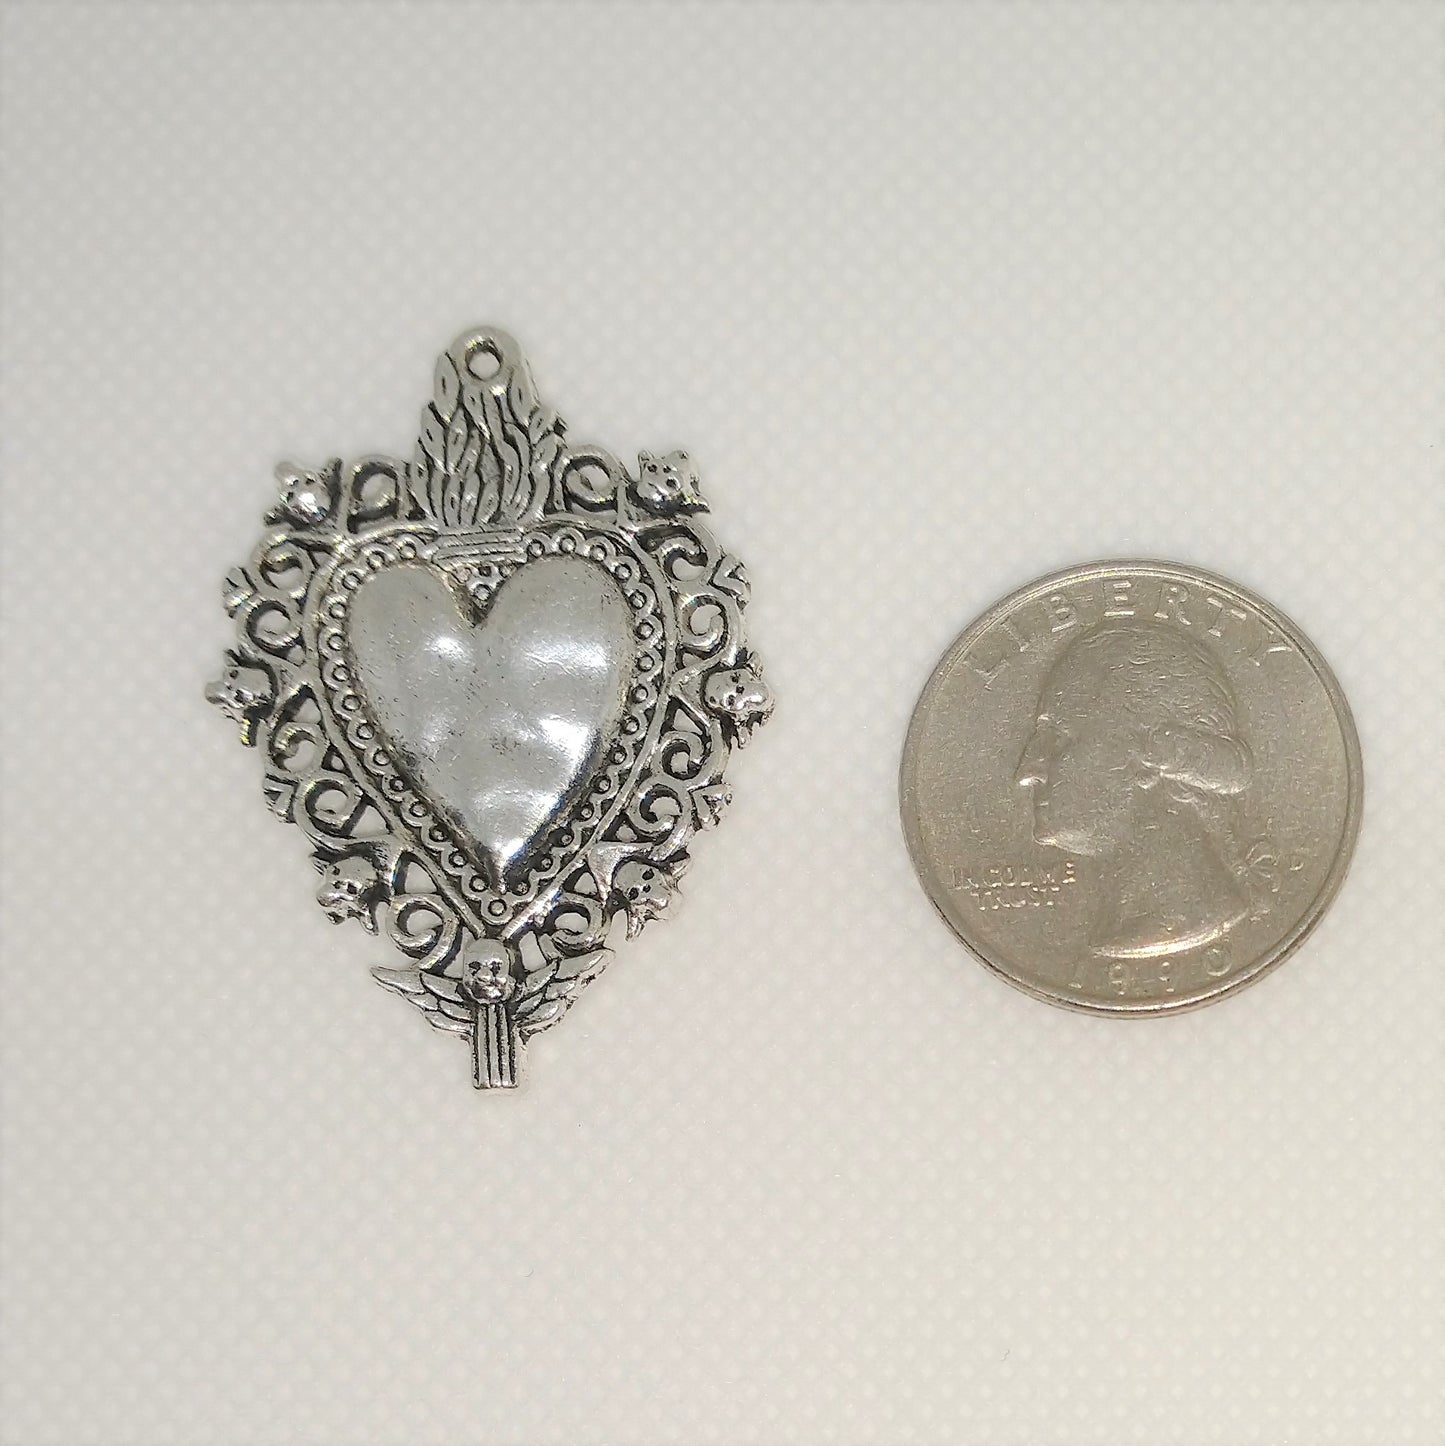 Sacred Heart Charms or Pendants (2 Pieces)